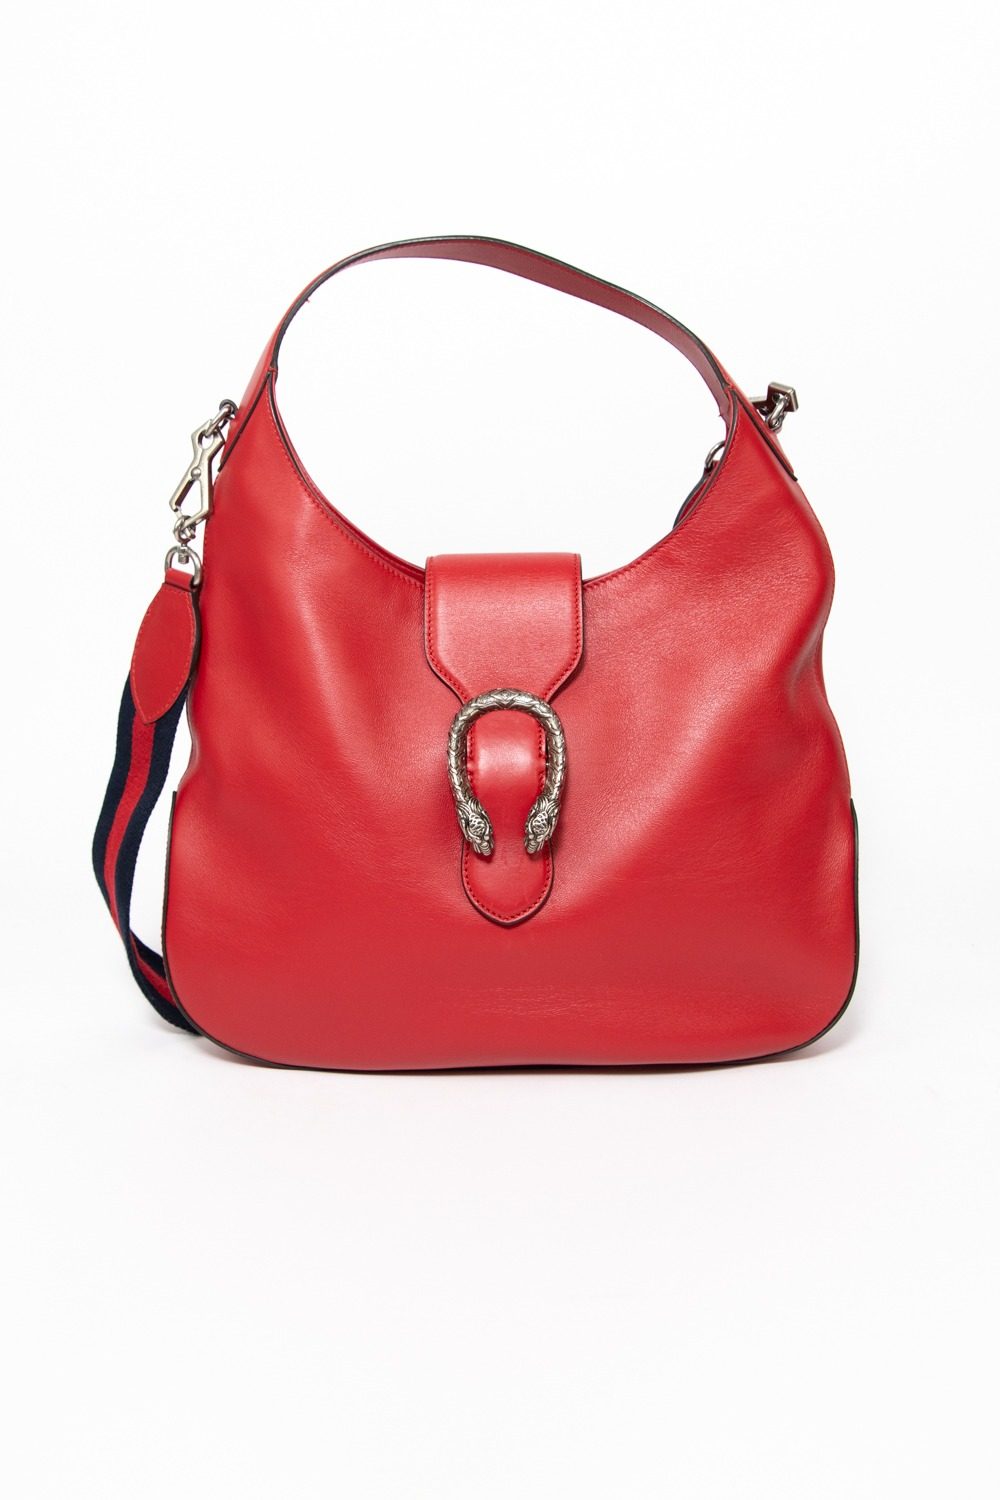 Thumbnail of http://Gucci%20Dionysus%20Schultertasche%20in%20Rot